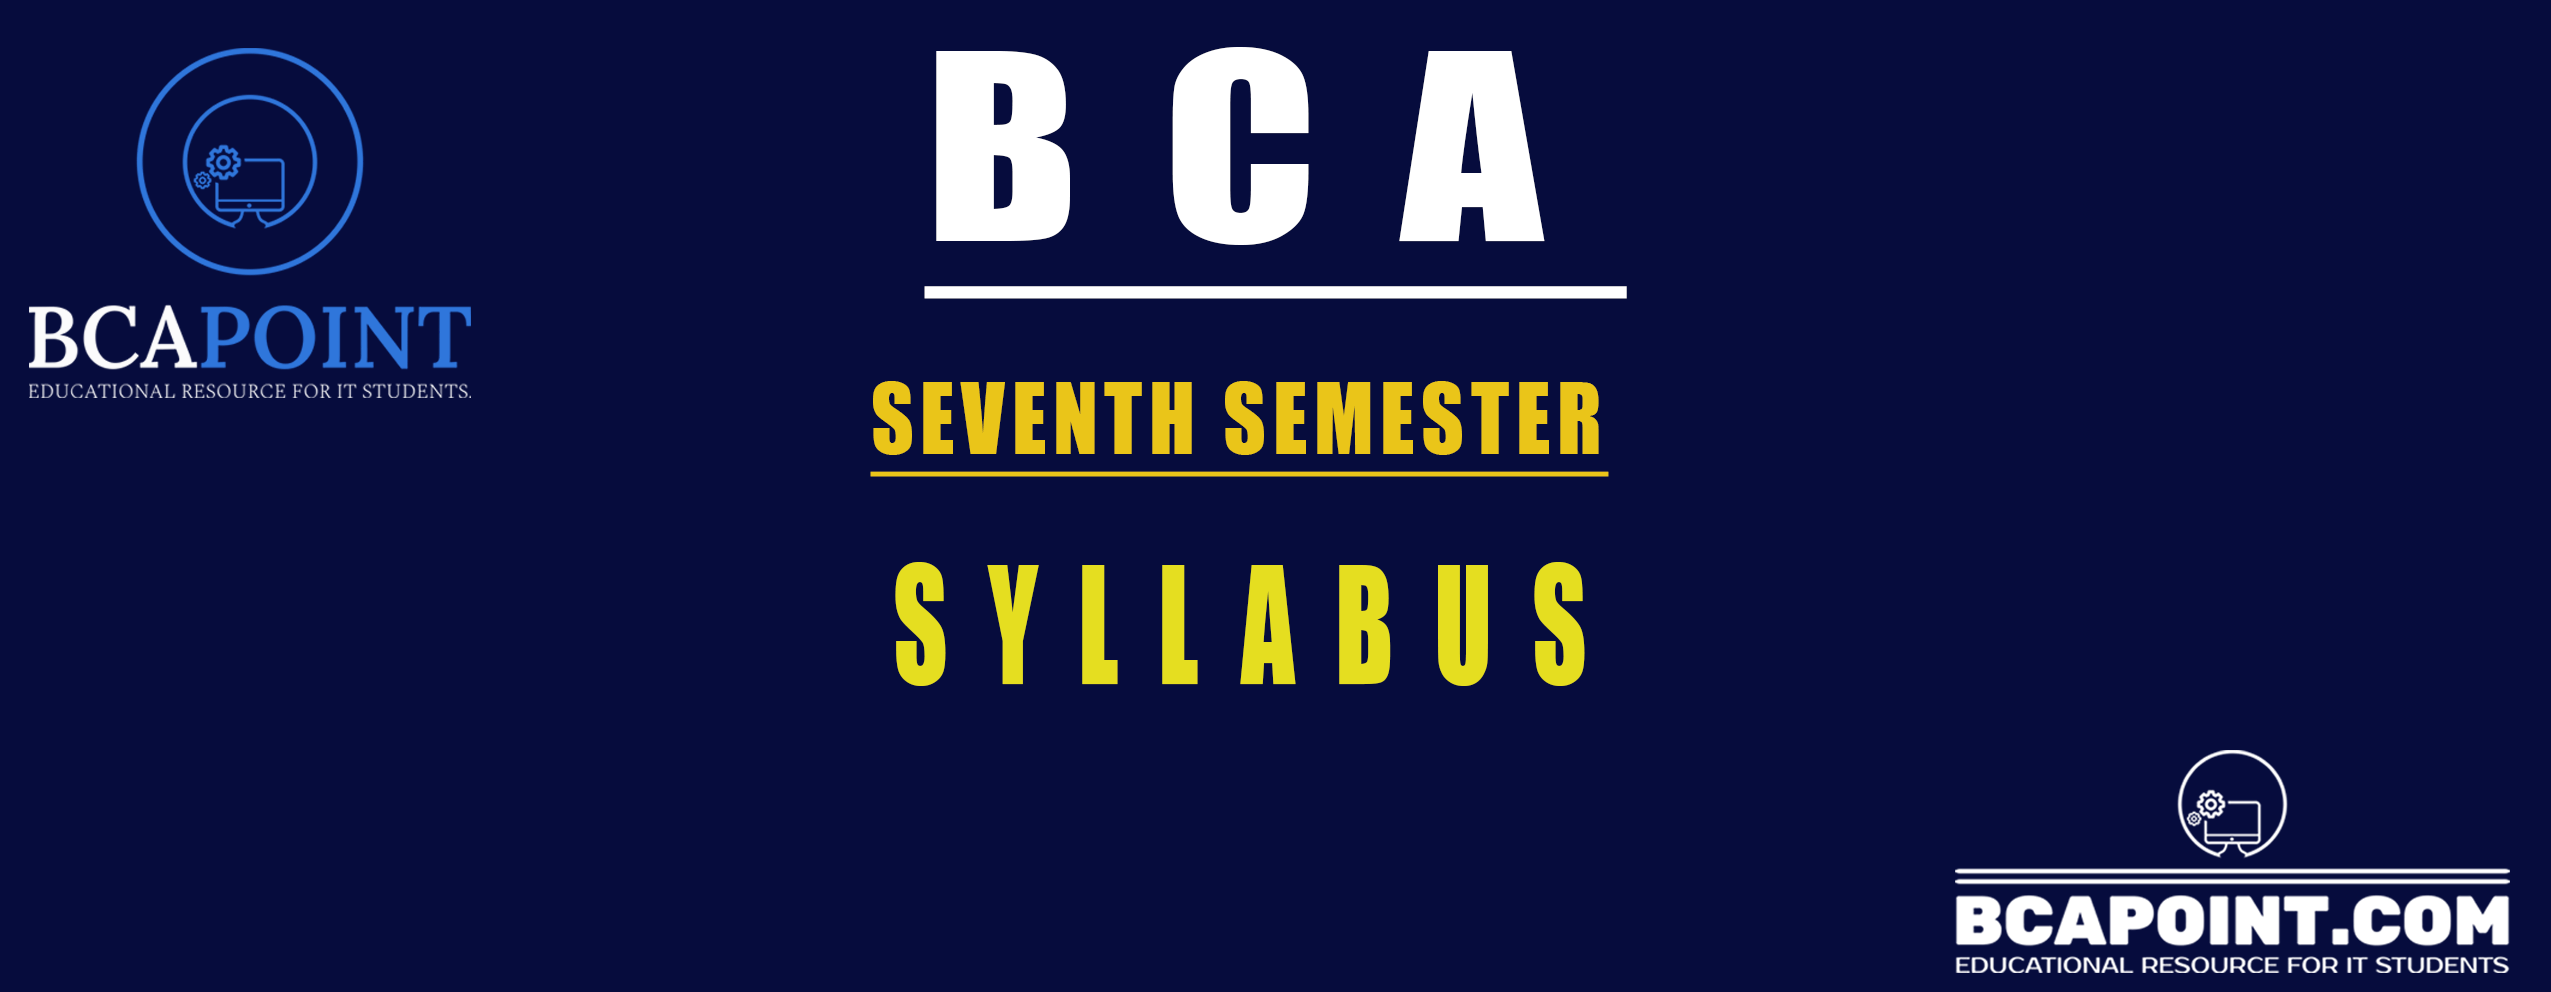 You are currently viewing BCA SEVENTH SEMESTER SYLLABUS